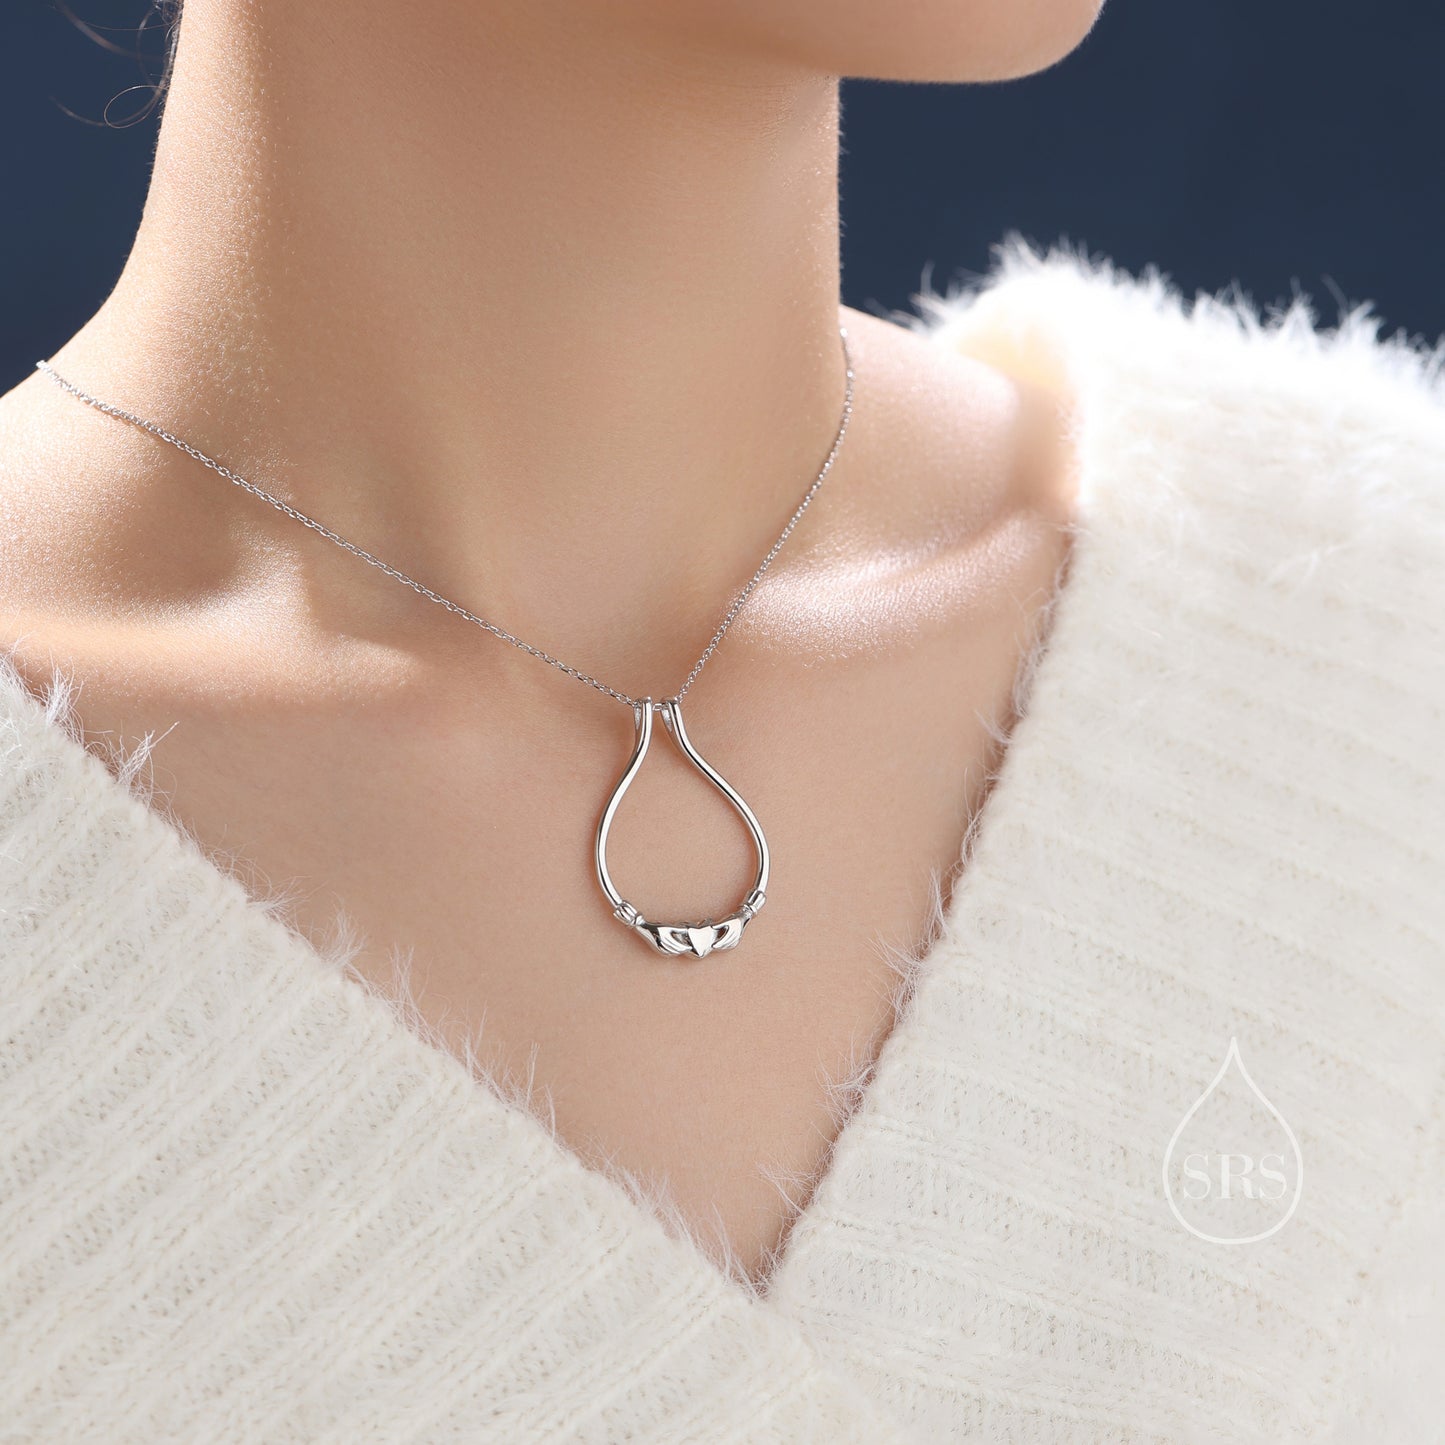 UK Only Item. Celtic Claddagh Minimalist Necklace in Sterling Silver, Silver or Gold or Rose gold, Geometric Pendant Necklace. Ring Holder Necklace